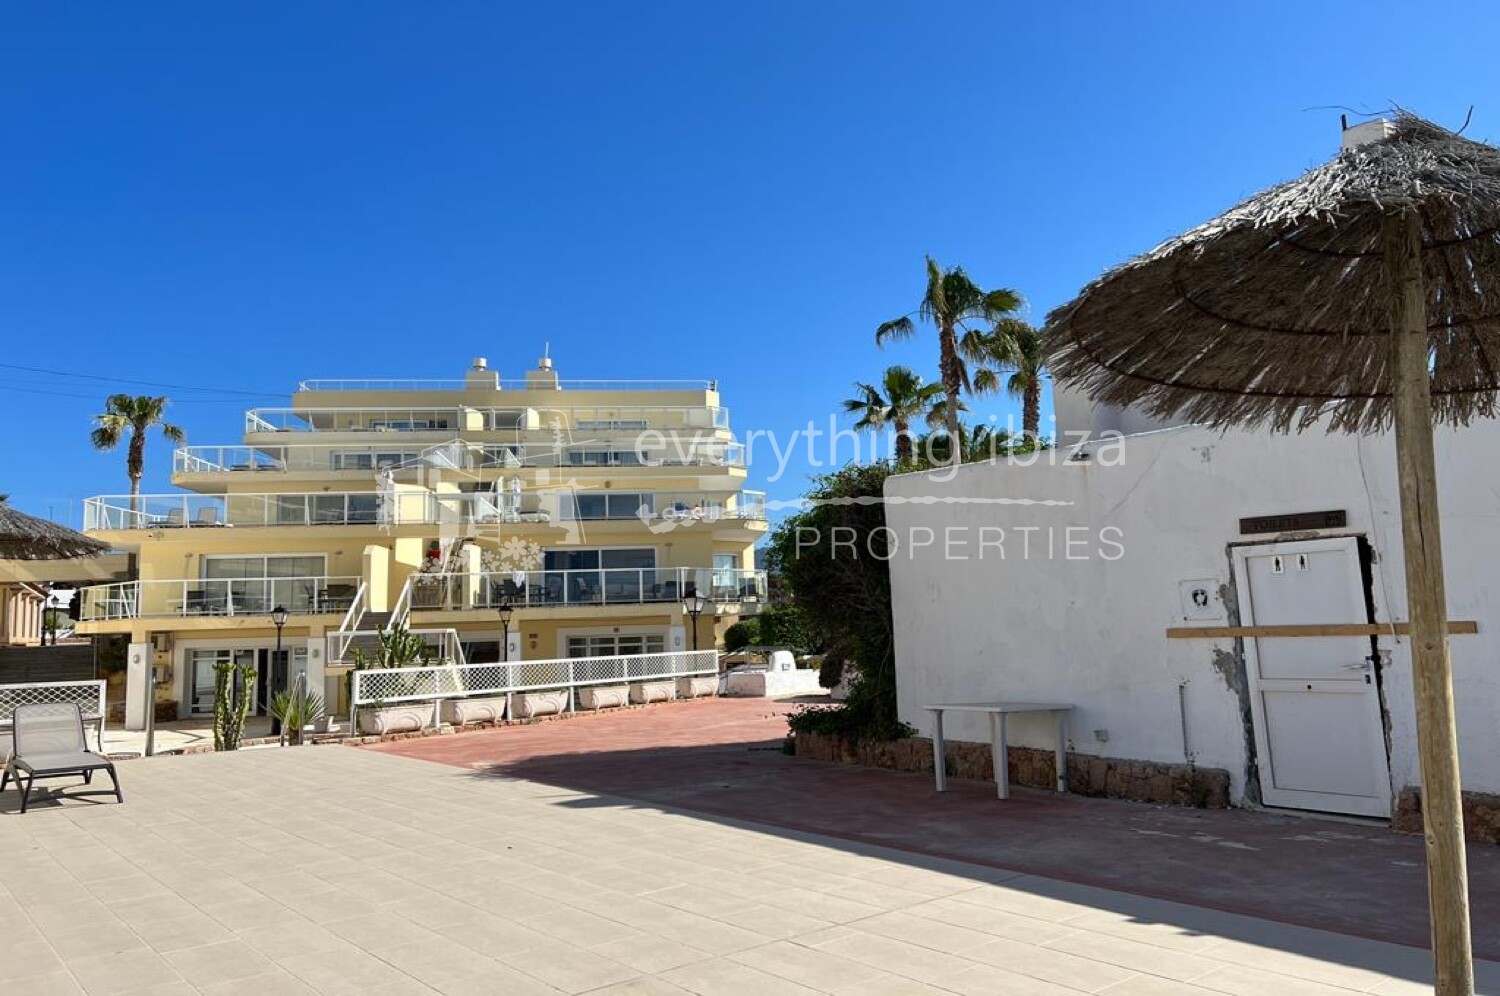 Modern Frontline 1 Bed Apartment with Sea Views, ref. 1455, for sale in Ibiza by everything ibiza Properties